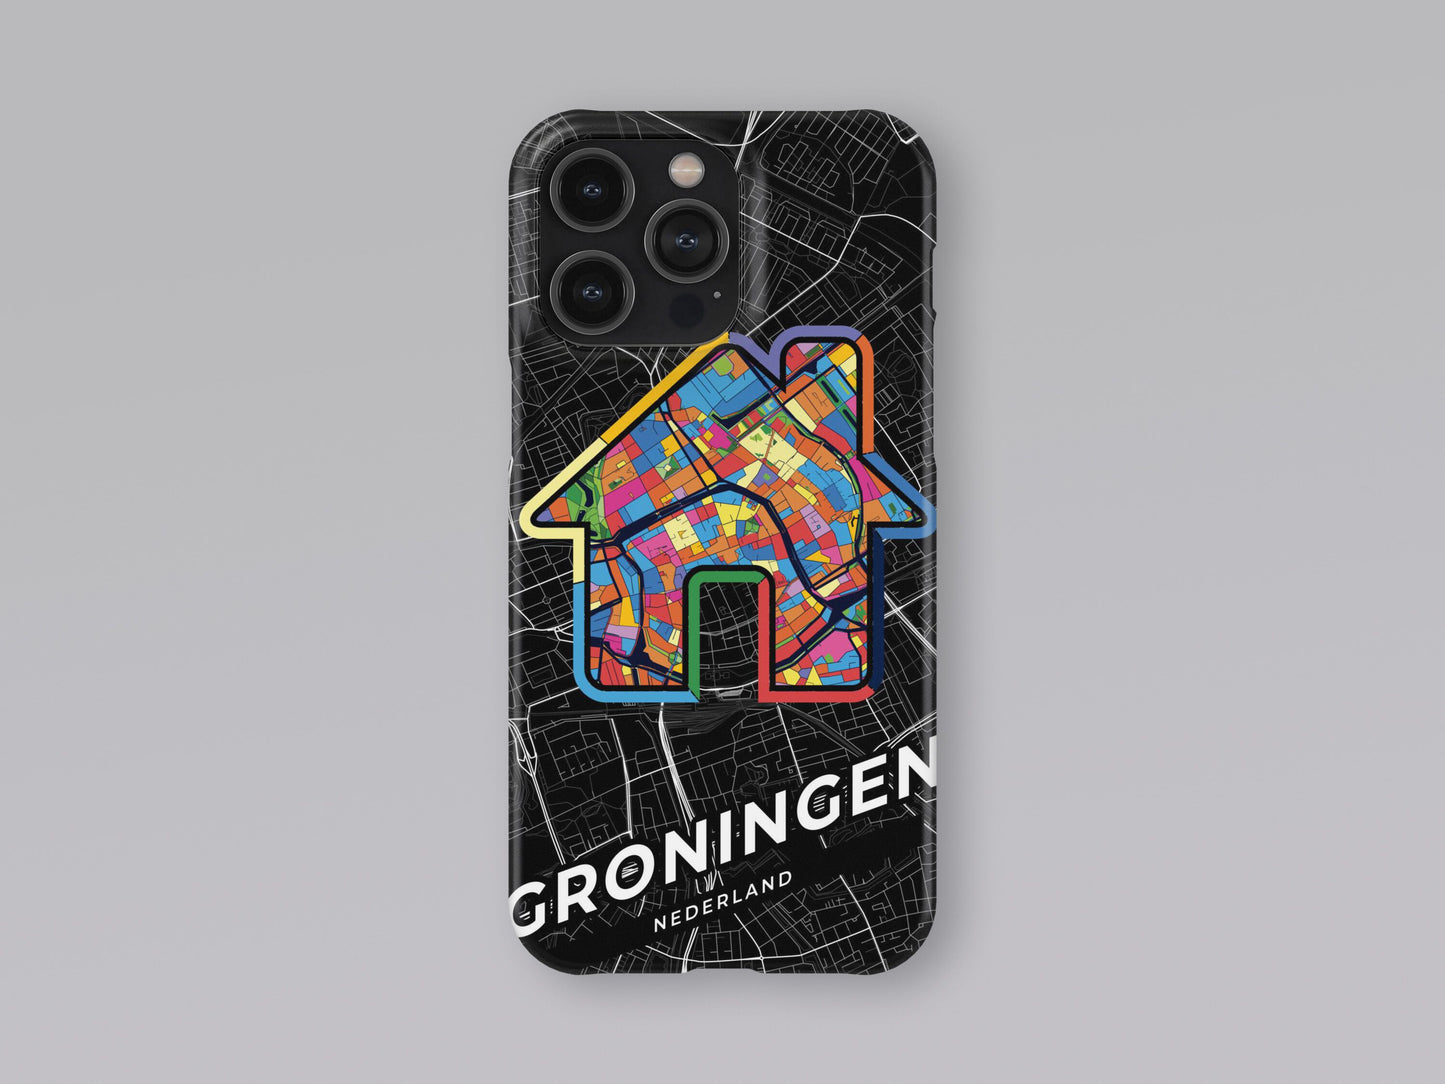 Groningen Netherlands slim phone case with colorful icon. Birthday, wedding or housewarming gift. Couple match cases. 3